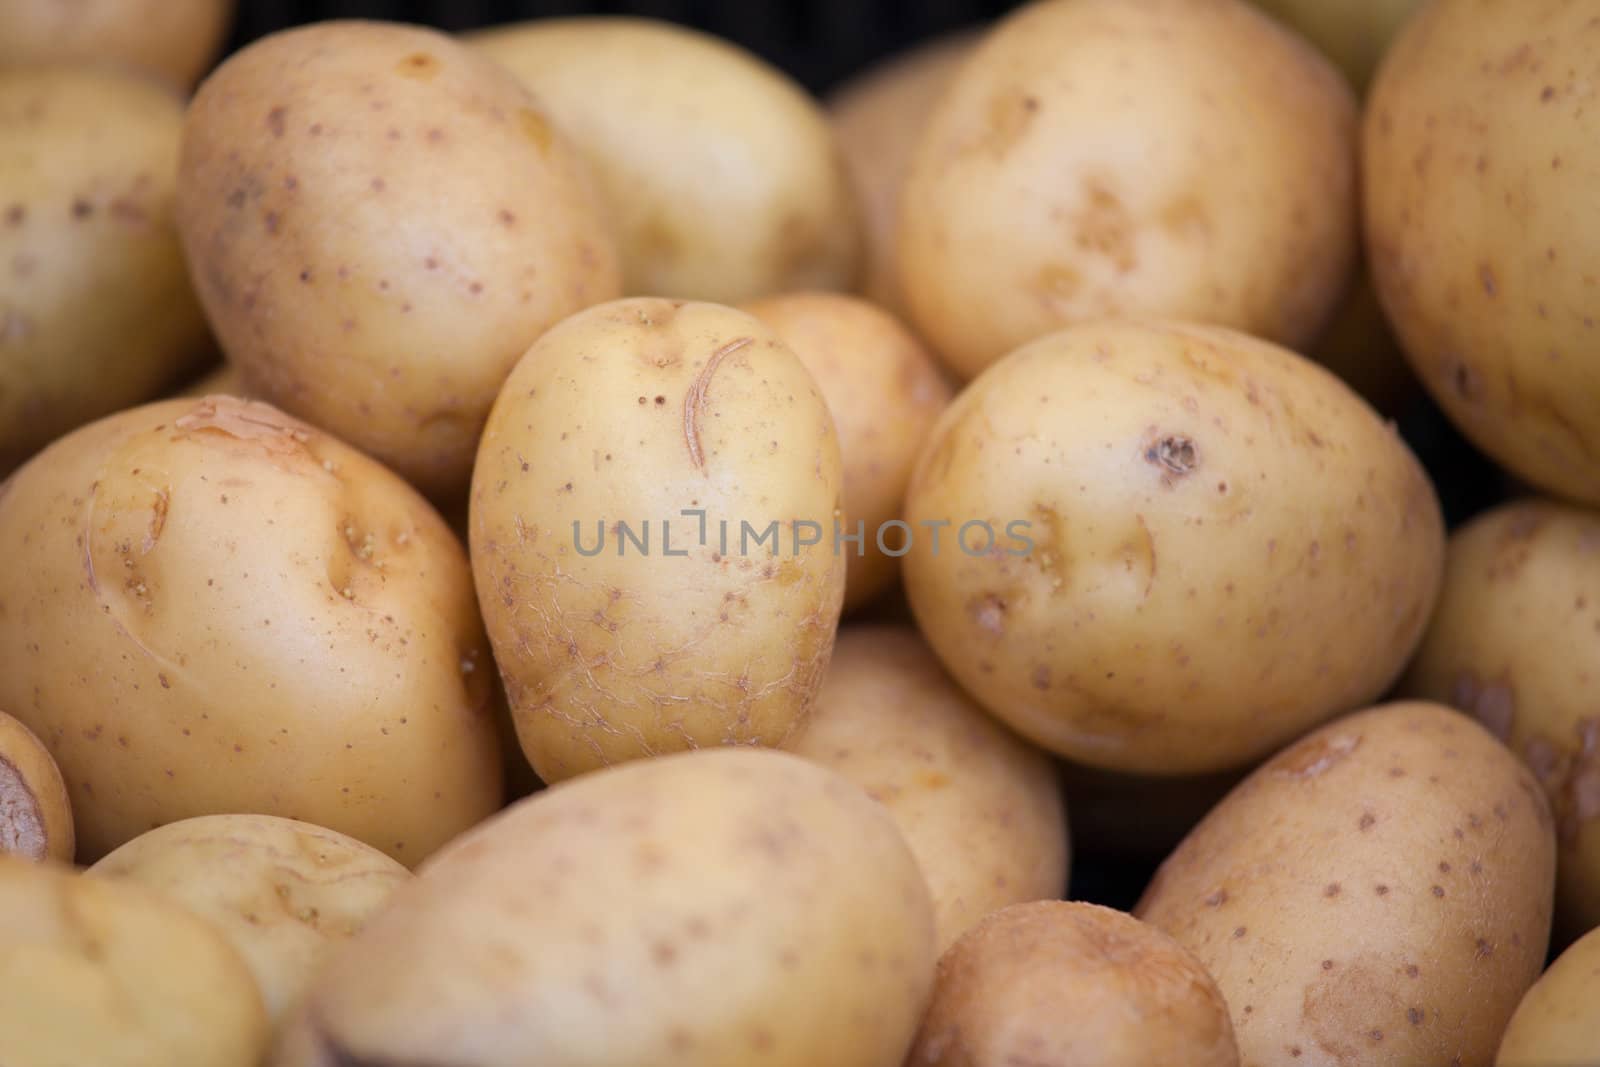 Group of young raw potatoes in brown jackets macro